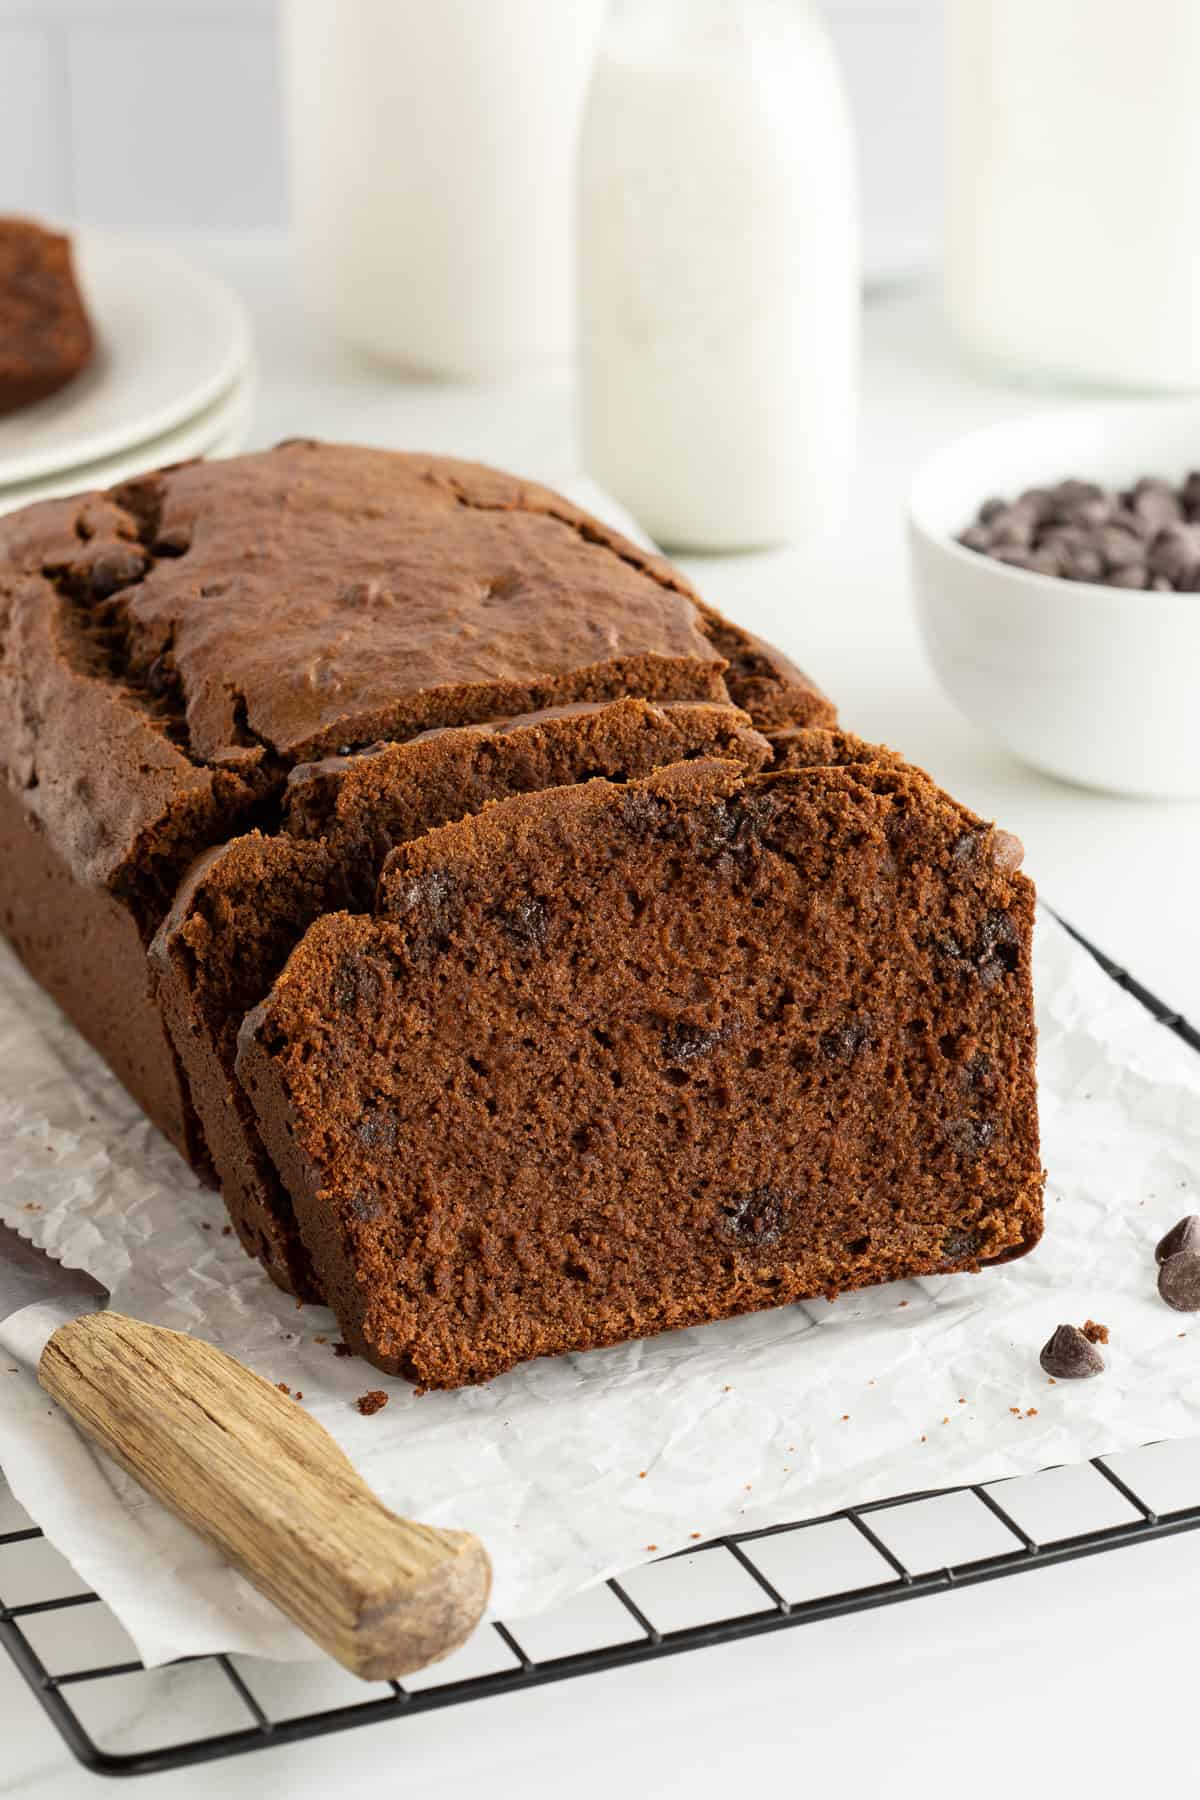 A side view of a sliced loaf of chocolate peanut butter banana bread on a wire rack with a serrated knife.